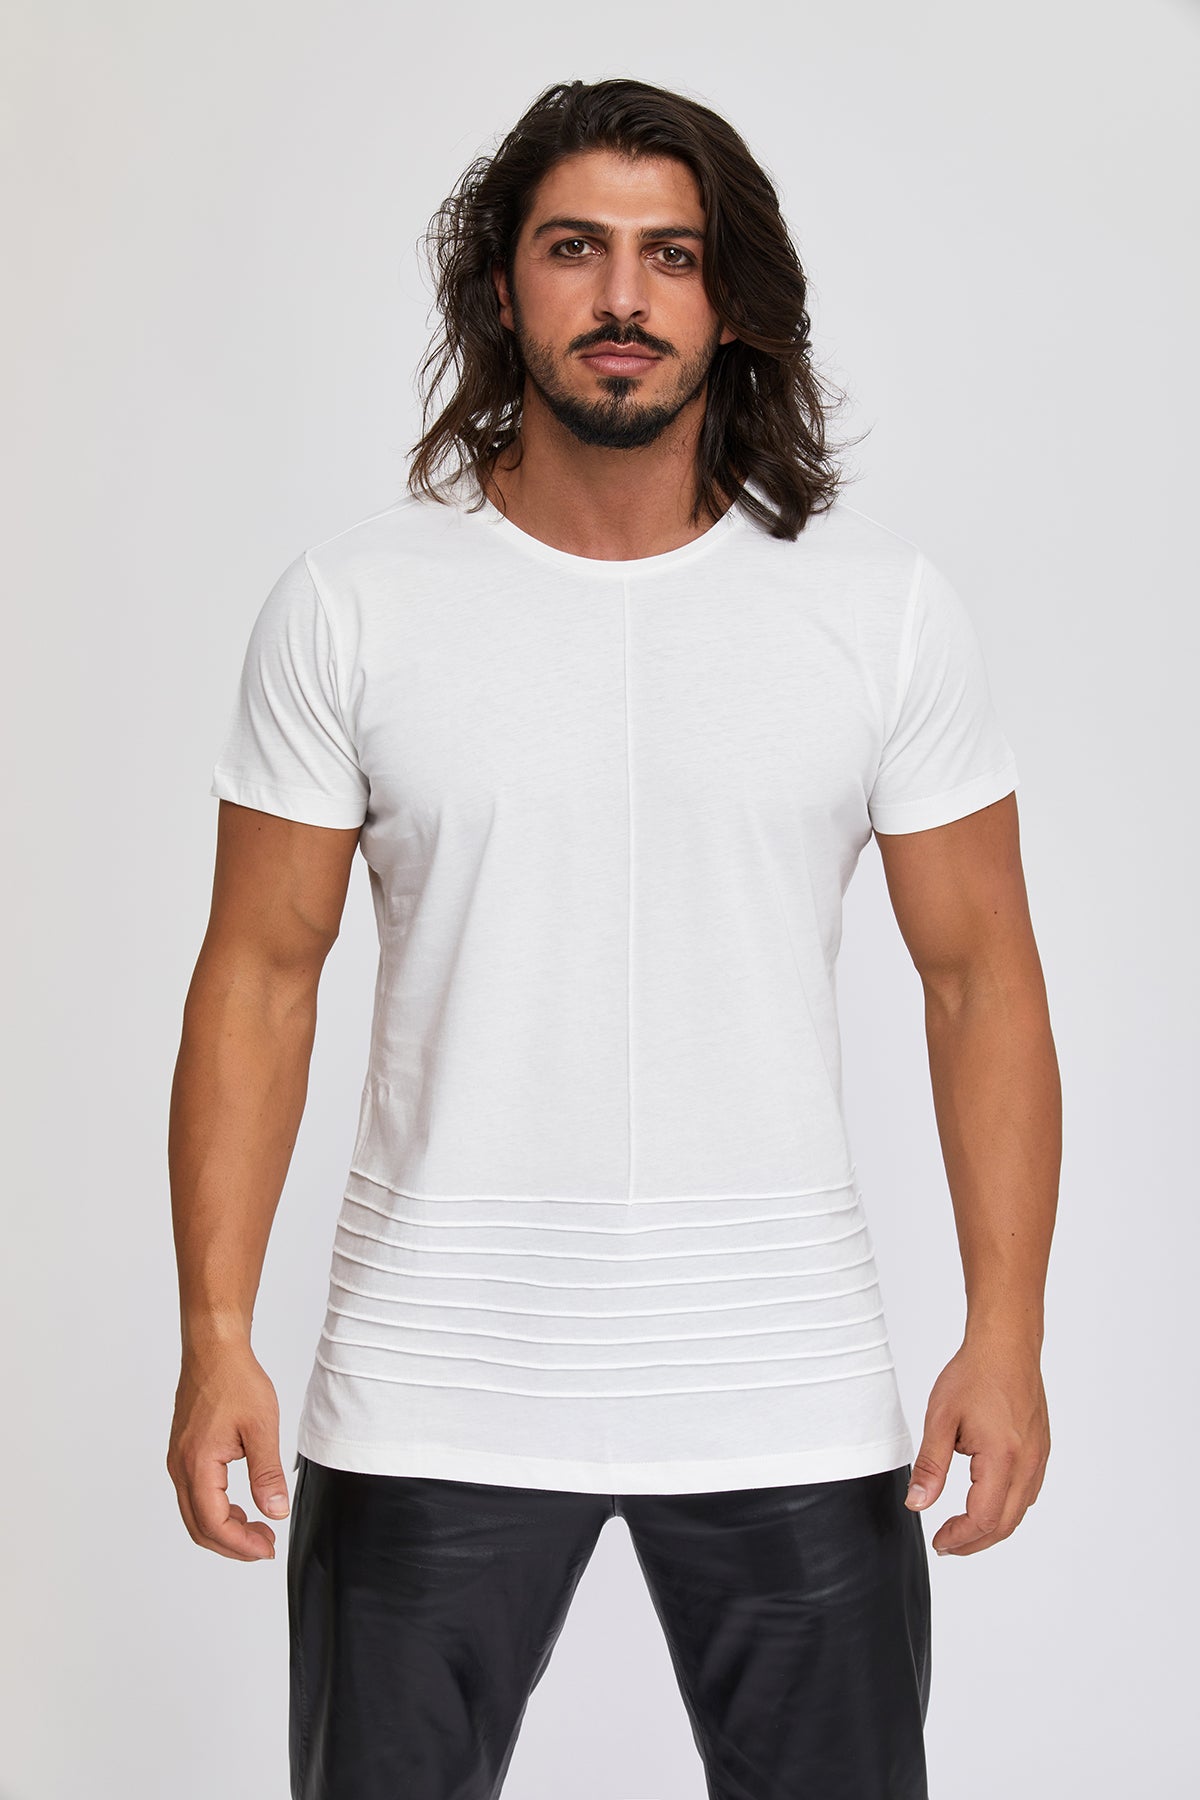 Men's short sleeve t-shirts 100 % great quality Turkish Pima cotton preshrunk. Designer. Trendy. Muscle loose fit. Sports. Work Out. T-shirt.